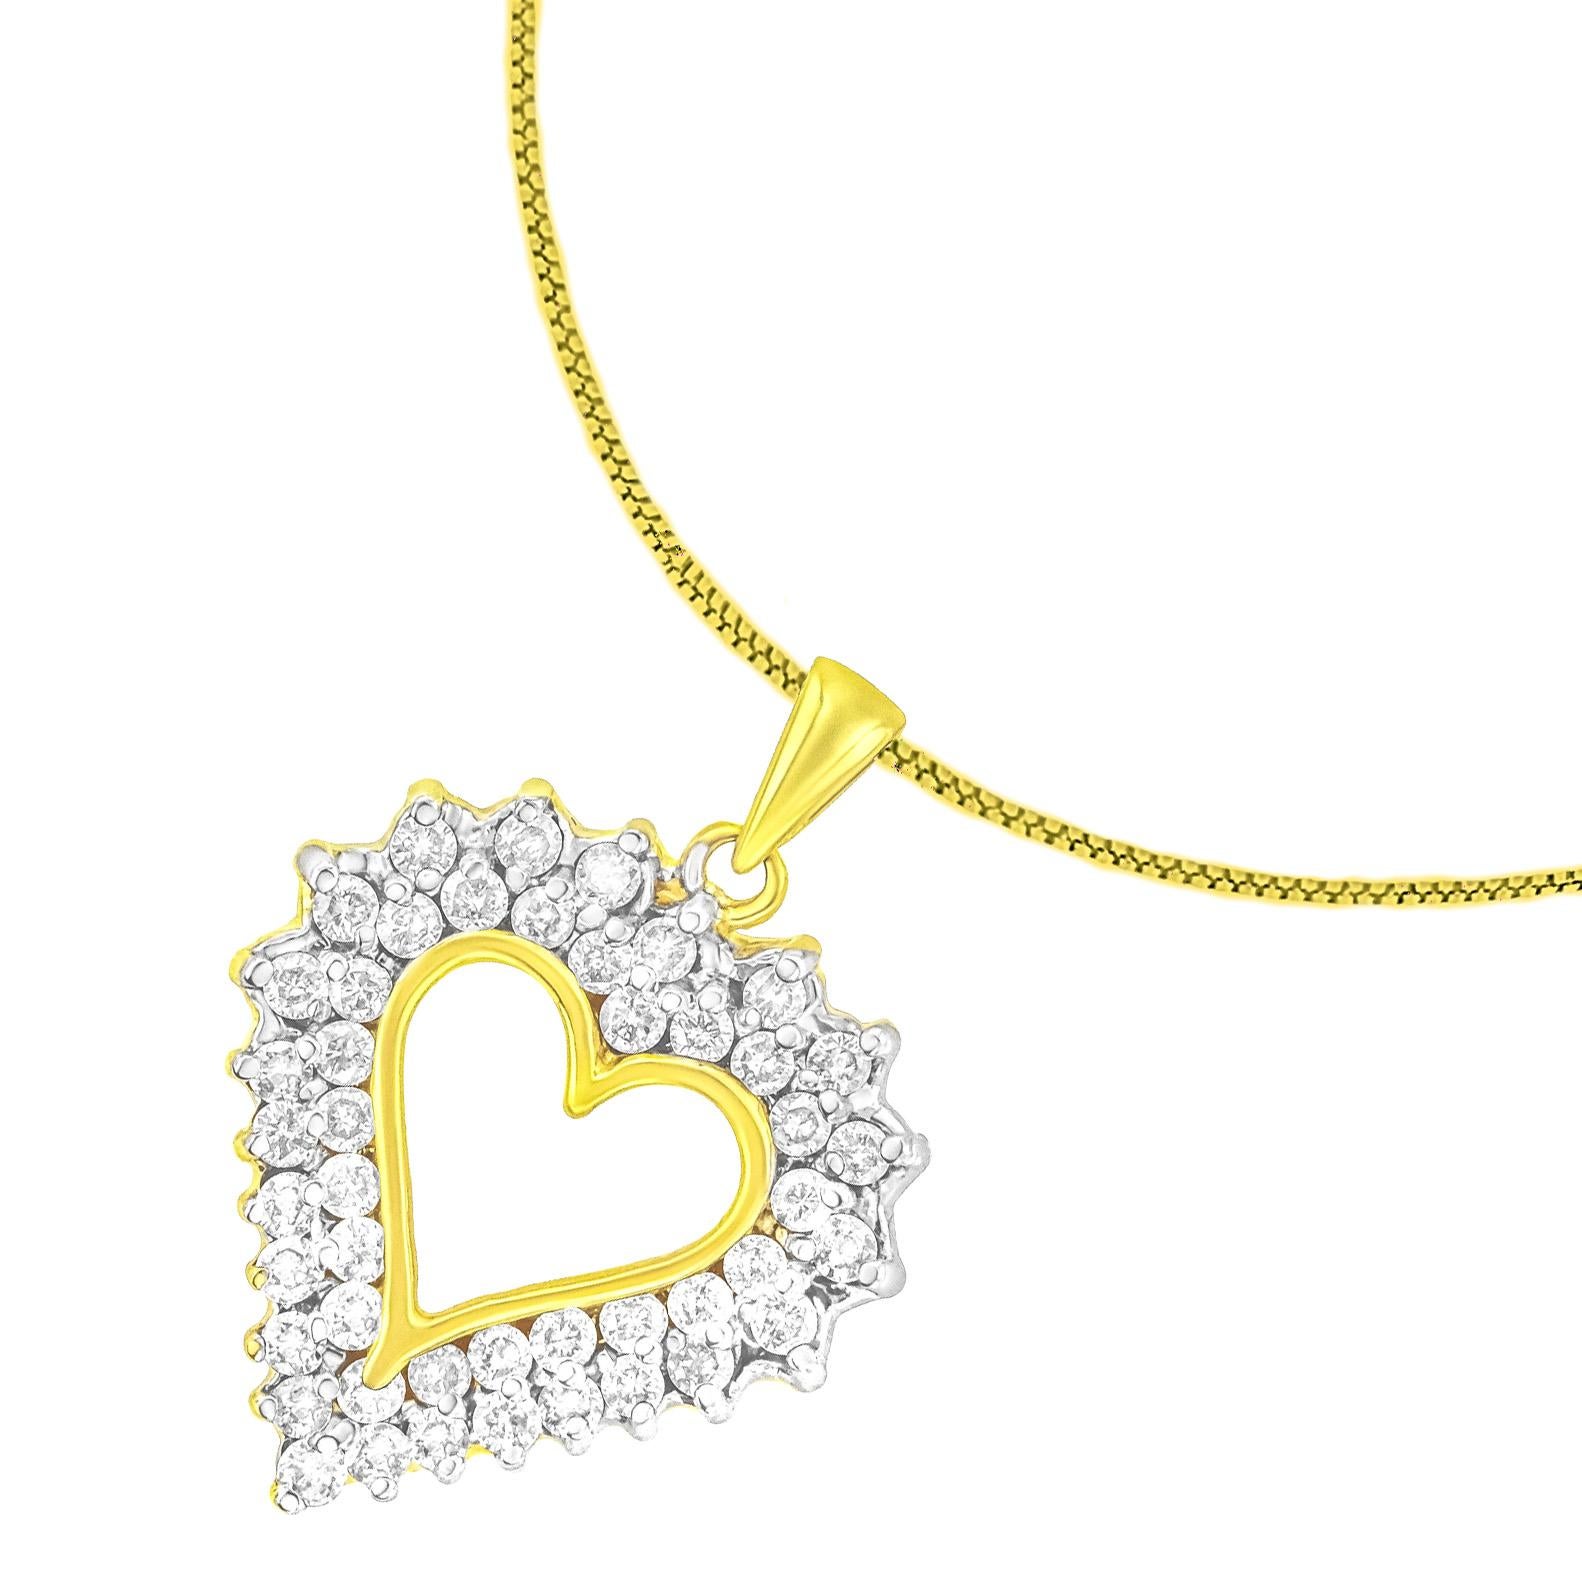 Two rows of natural, sparkling diamonds are set in warm 14K yellow gold plated Sterling Silver to create a stunning open heart design in this beautiful pendant necklace for her. This pendant has 116 round diamonds, that are I1-I2 in clarity and K-L